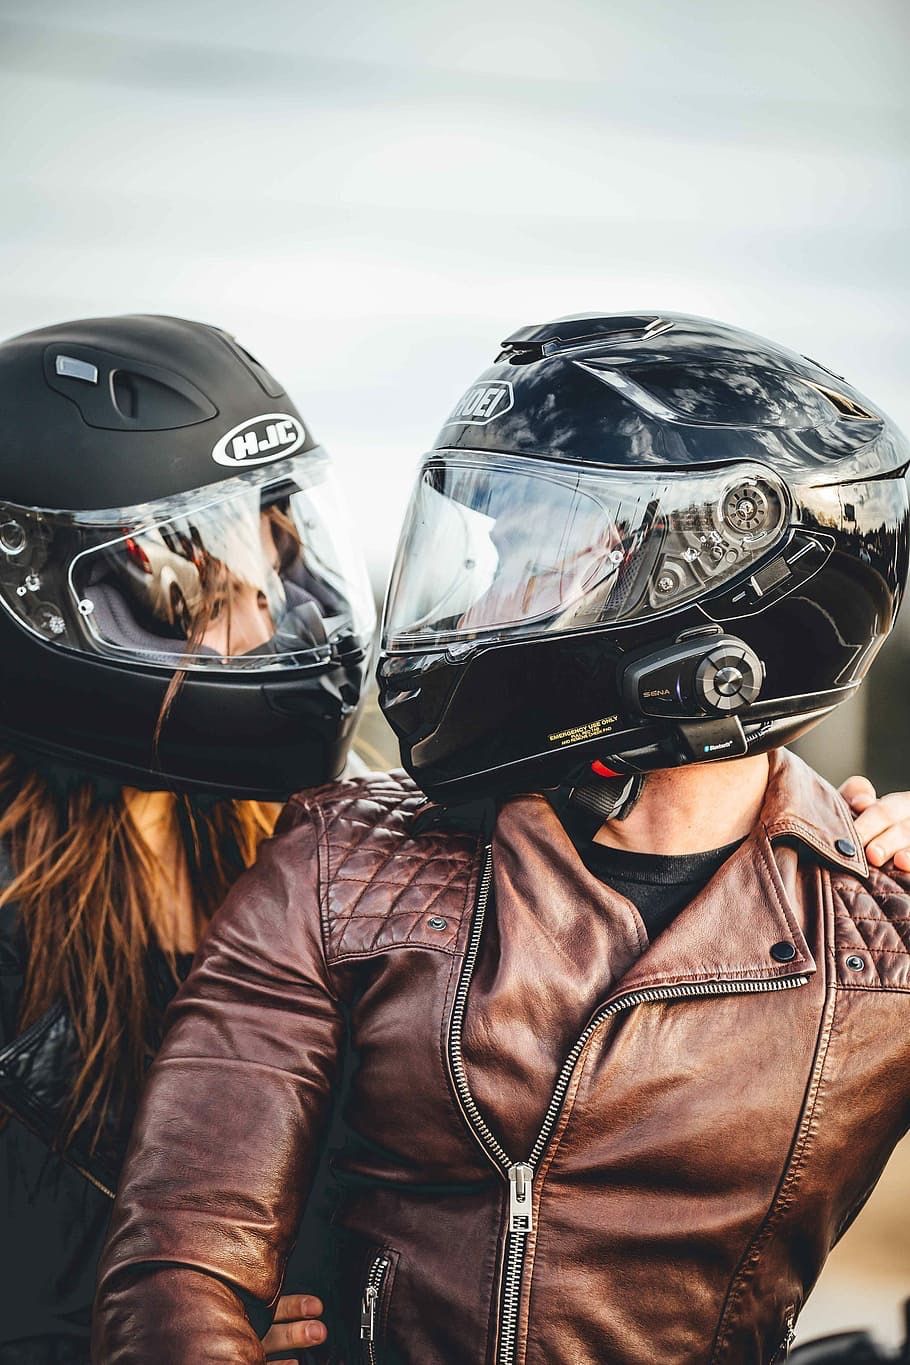 helmets are arguably the most important safety precaution one has when on the road